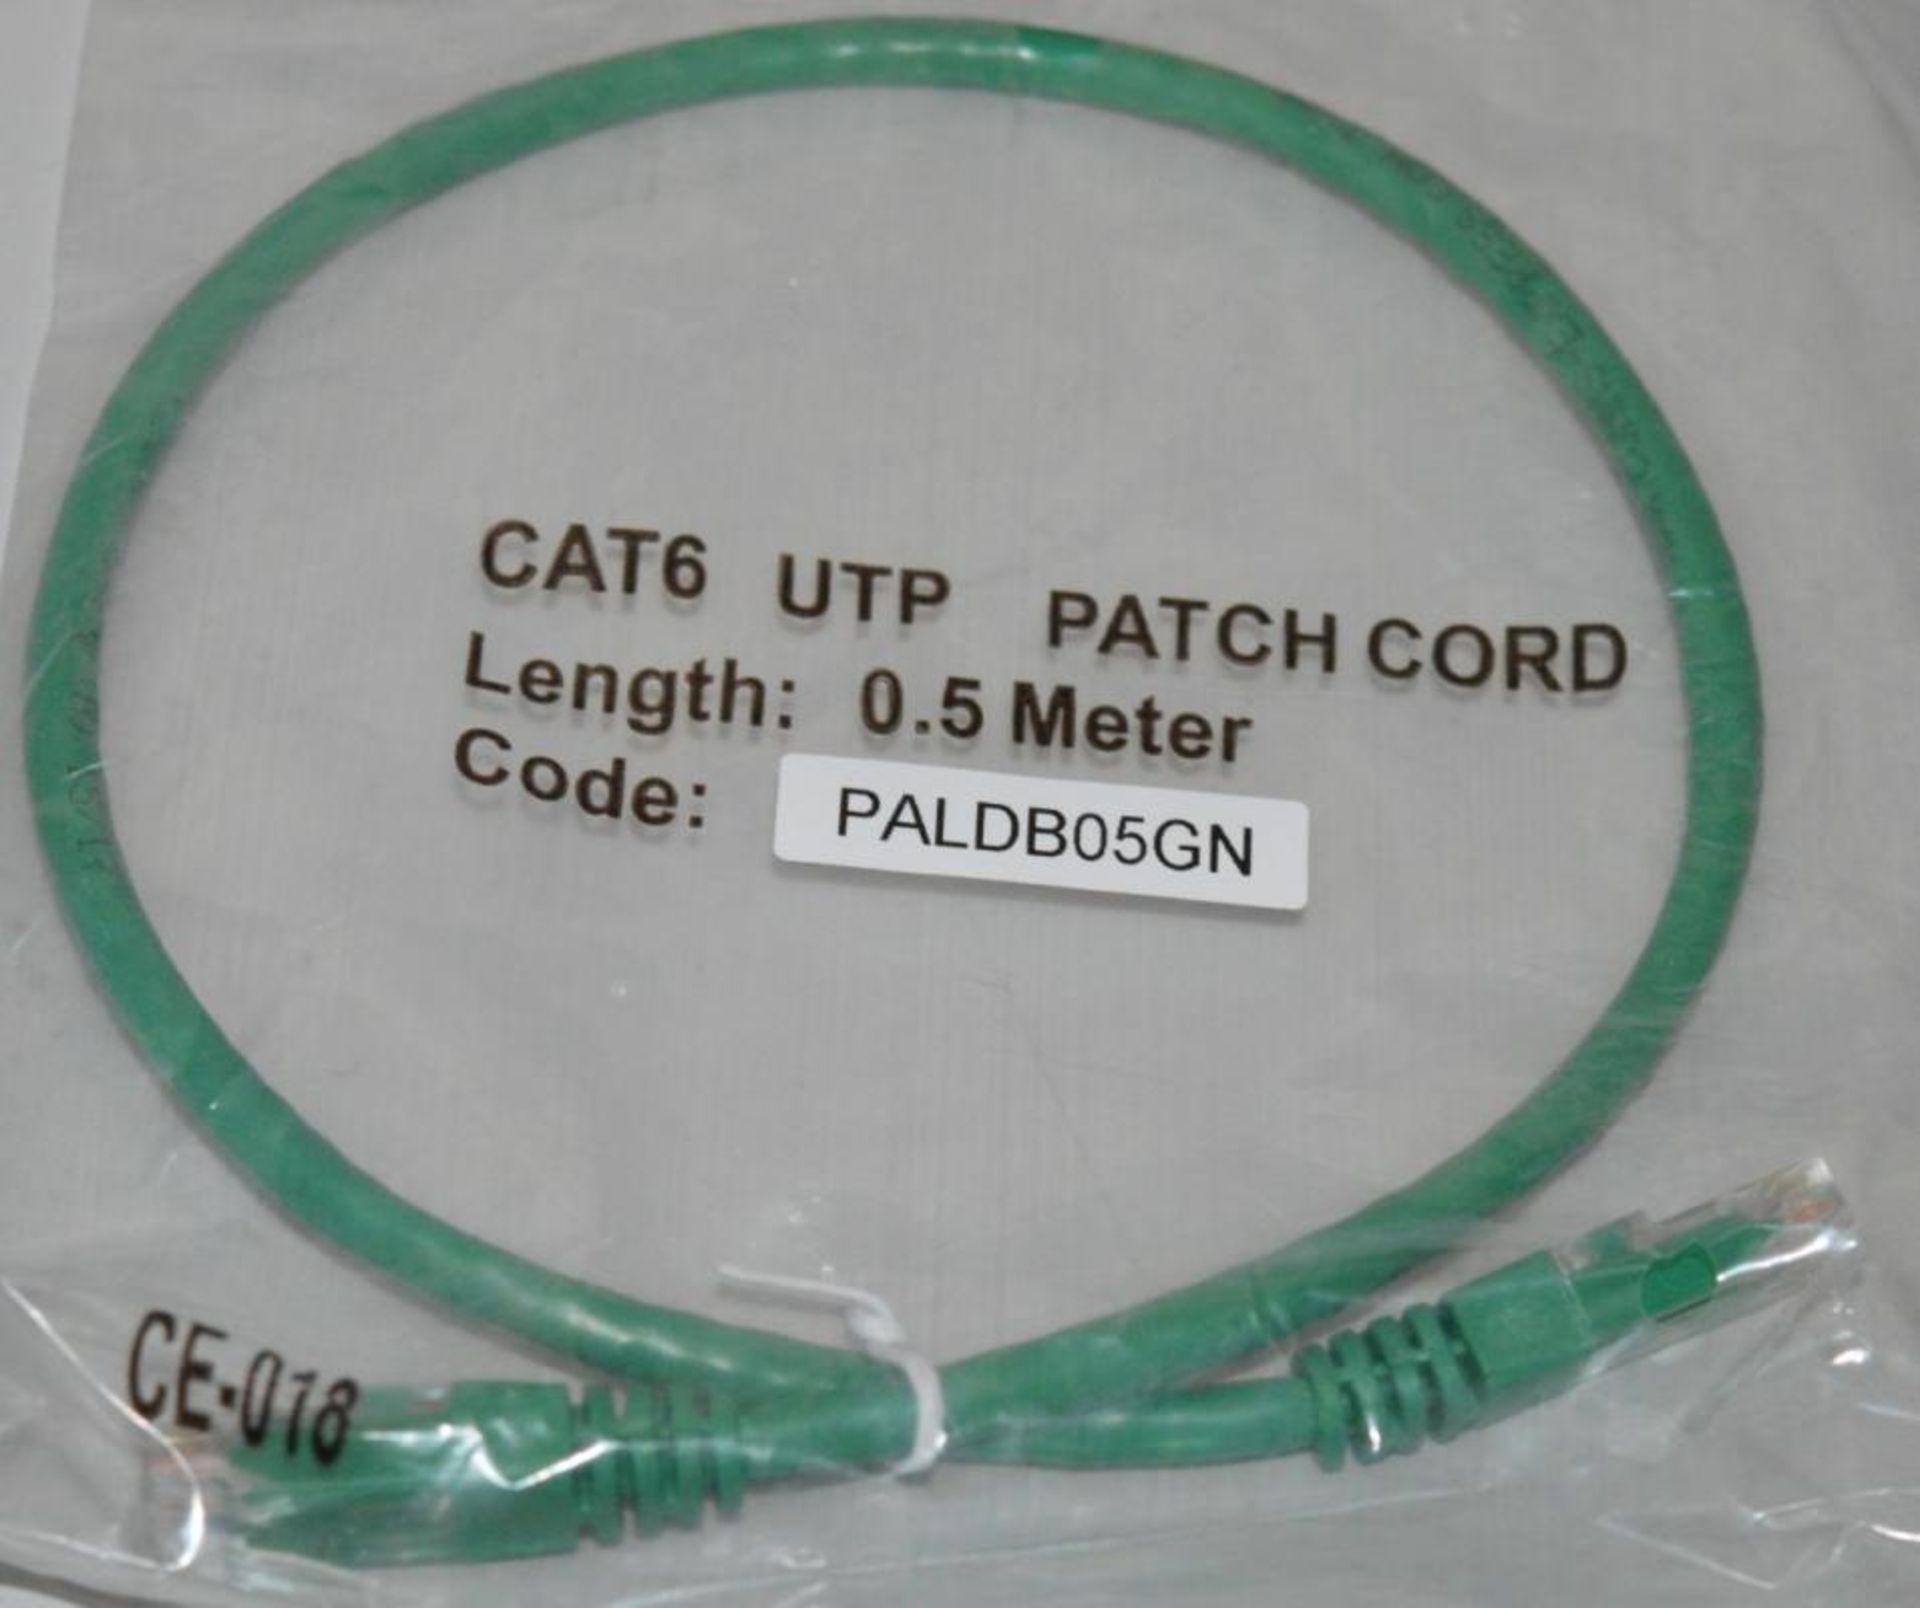 120 x CAT6 UTP 0.5 Meter Patch Cables - PALDB05GN - Brand New Stock - CL249 - Ref J774 - Location: A